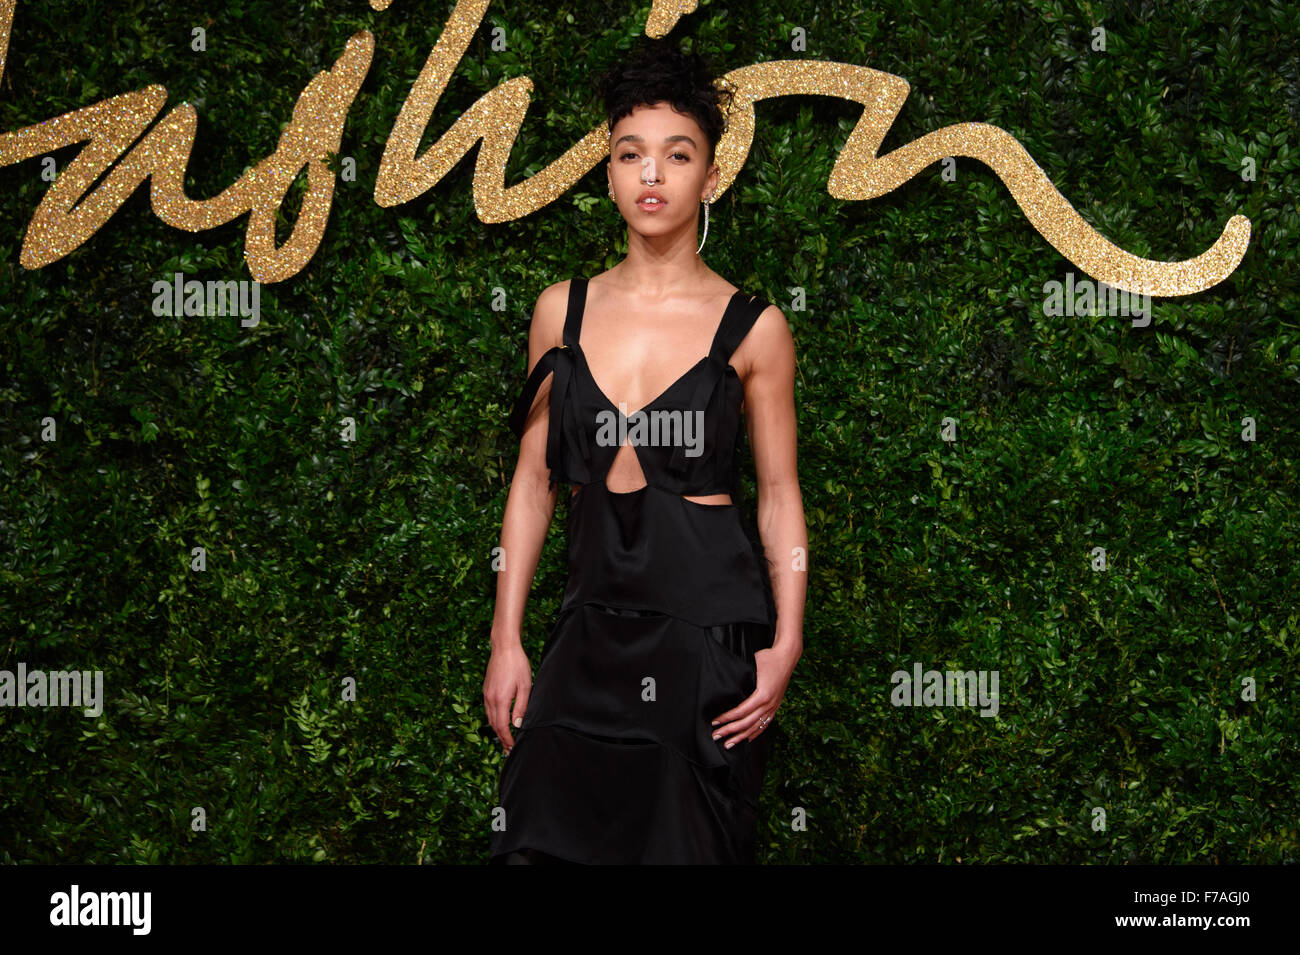 4,594 Fka Twigs Photos & High Res Pictures - Getty Images